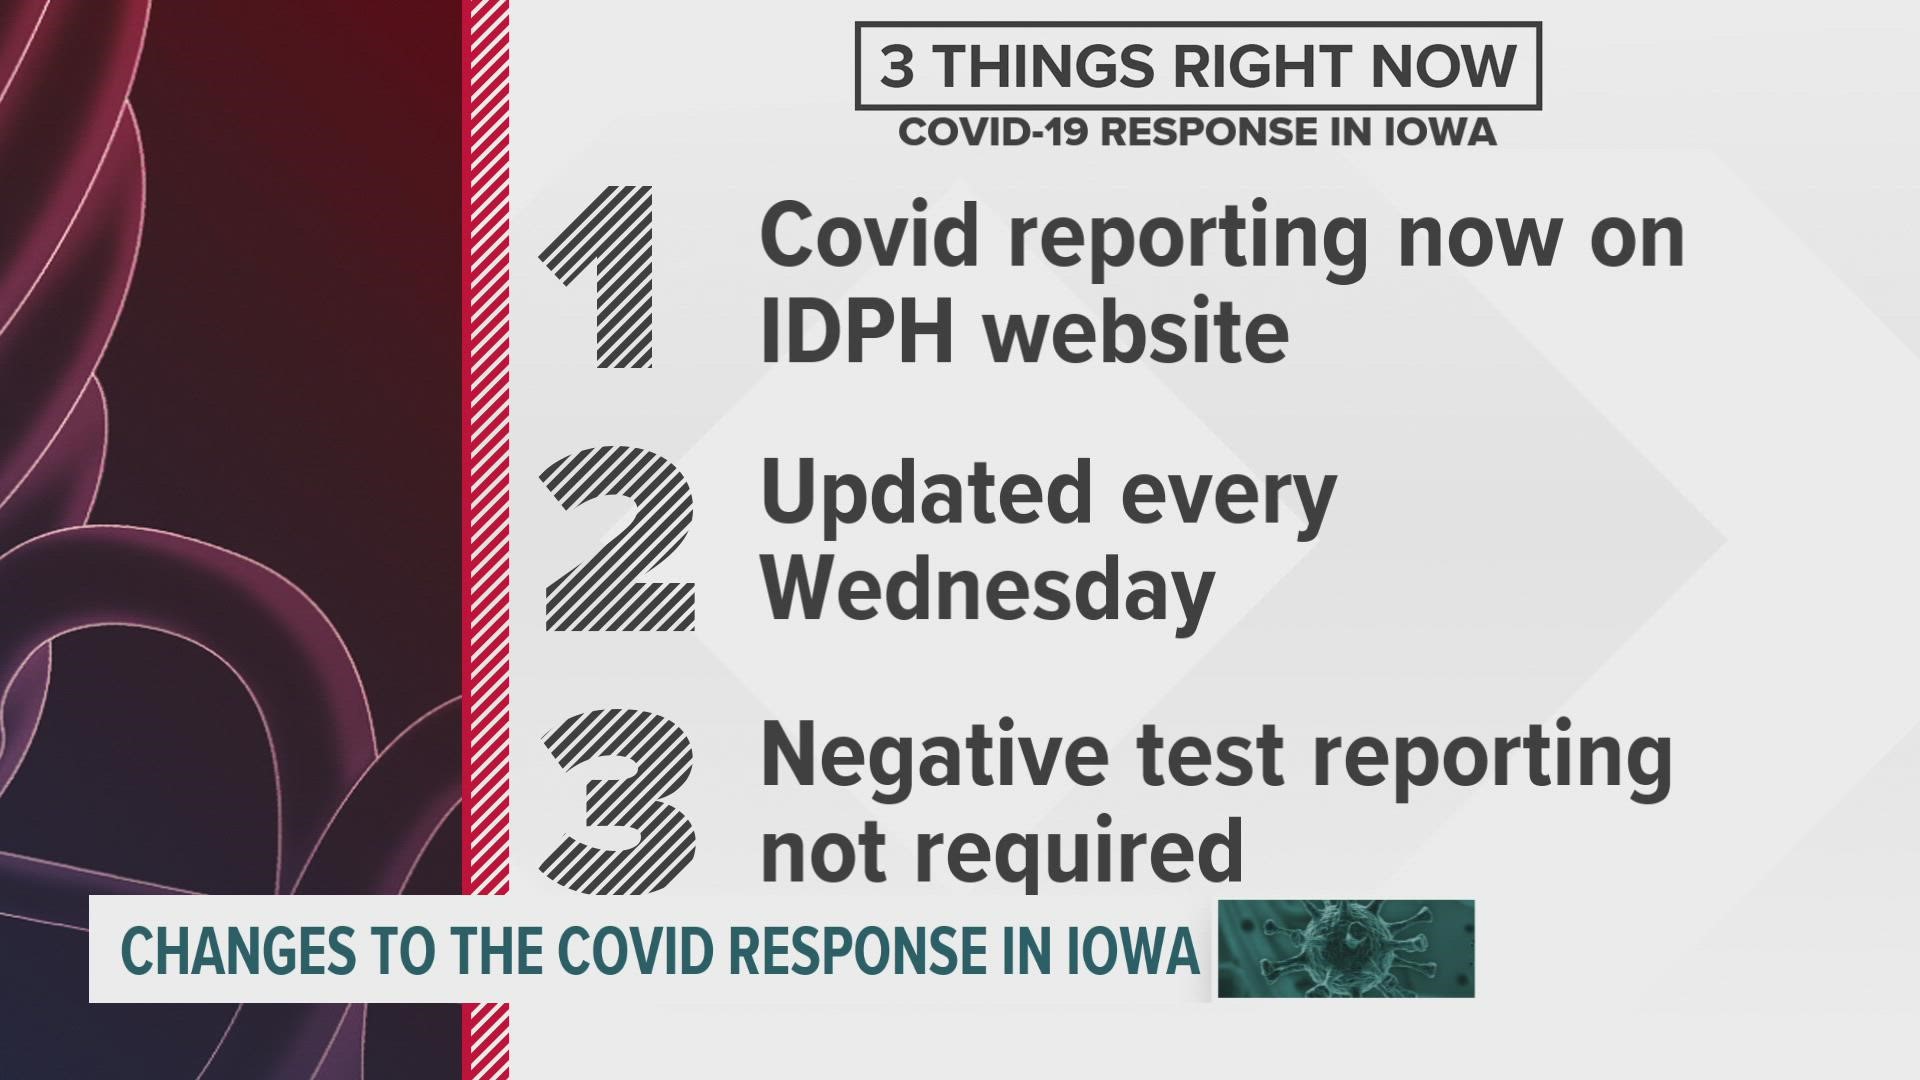 While the state's dashboard was decommissioned with the expiration of Gov. Reynolds' disaster proclamation, IDPH continues to report cases and deaths weekly.